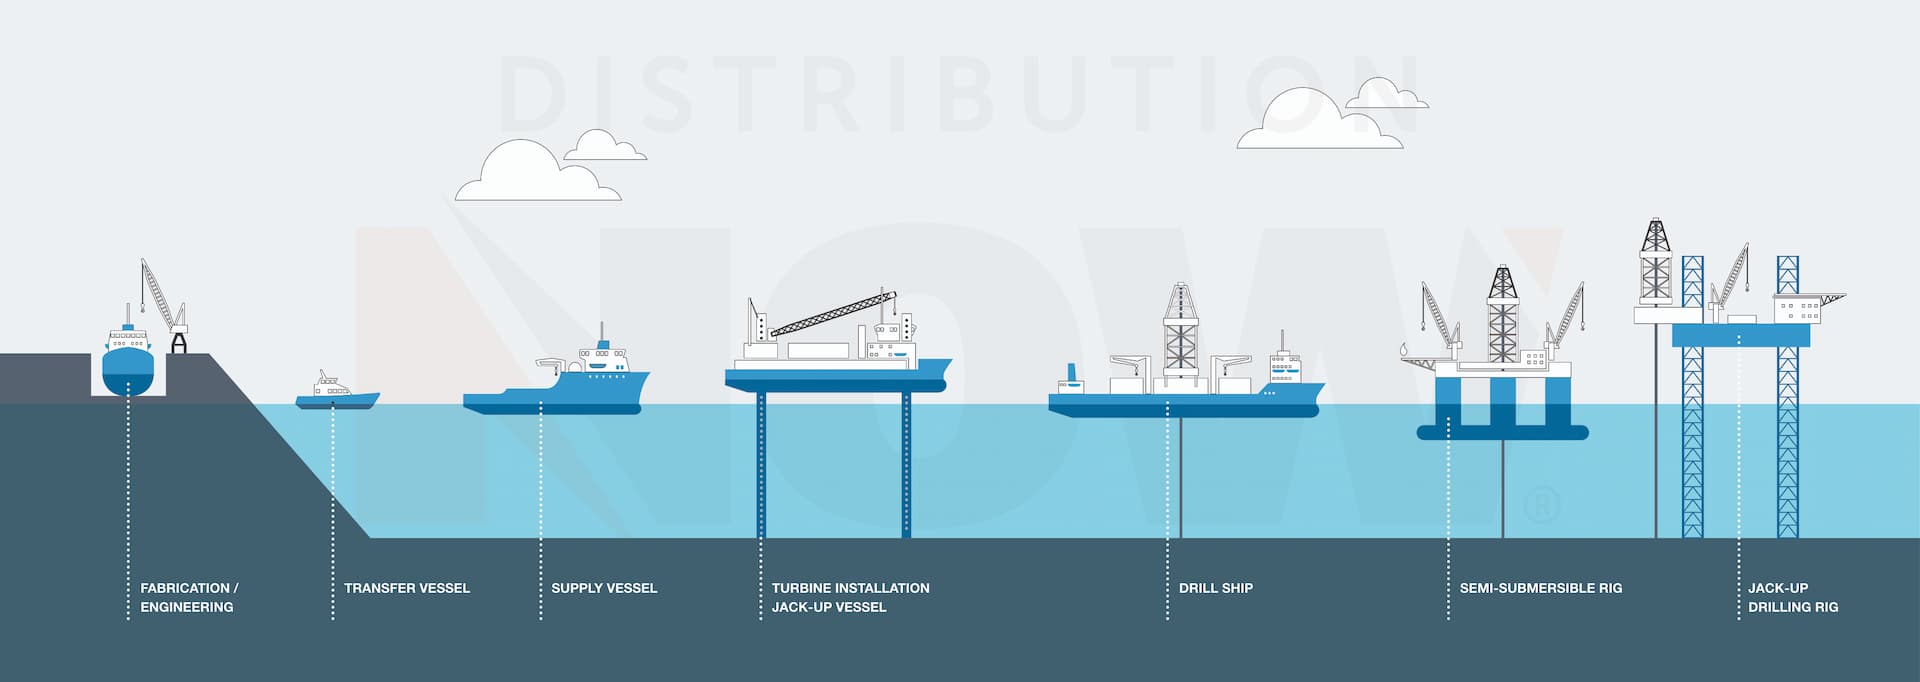 DNOW-Offshore-Rigs-that-are-supplied-with-products